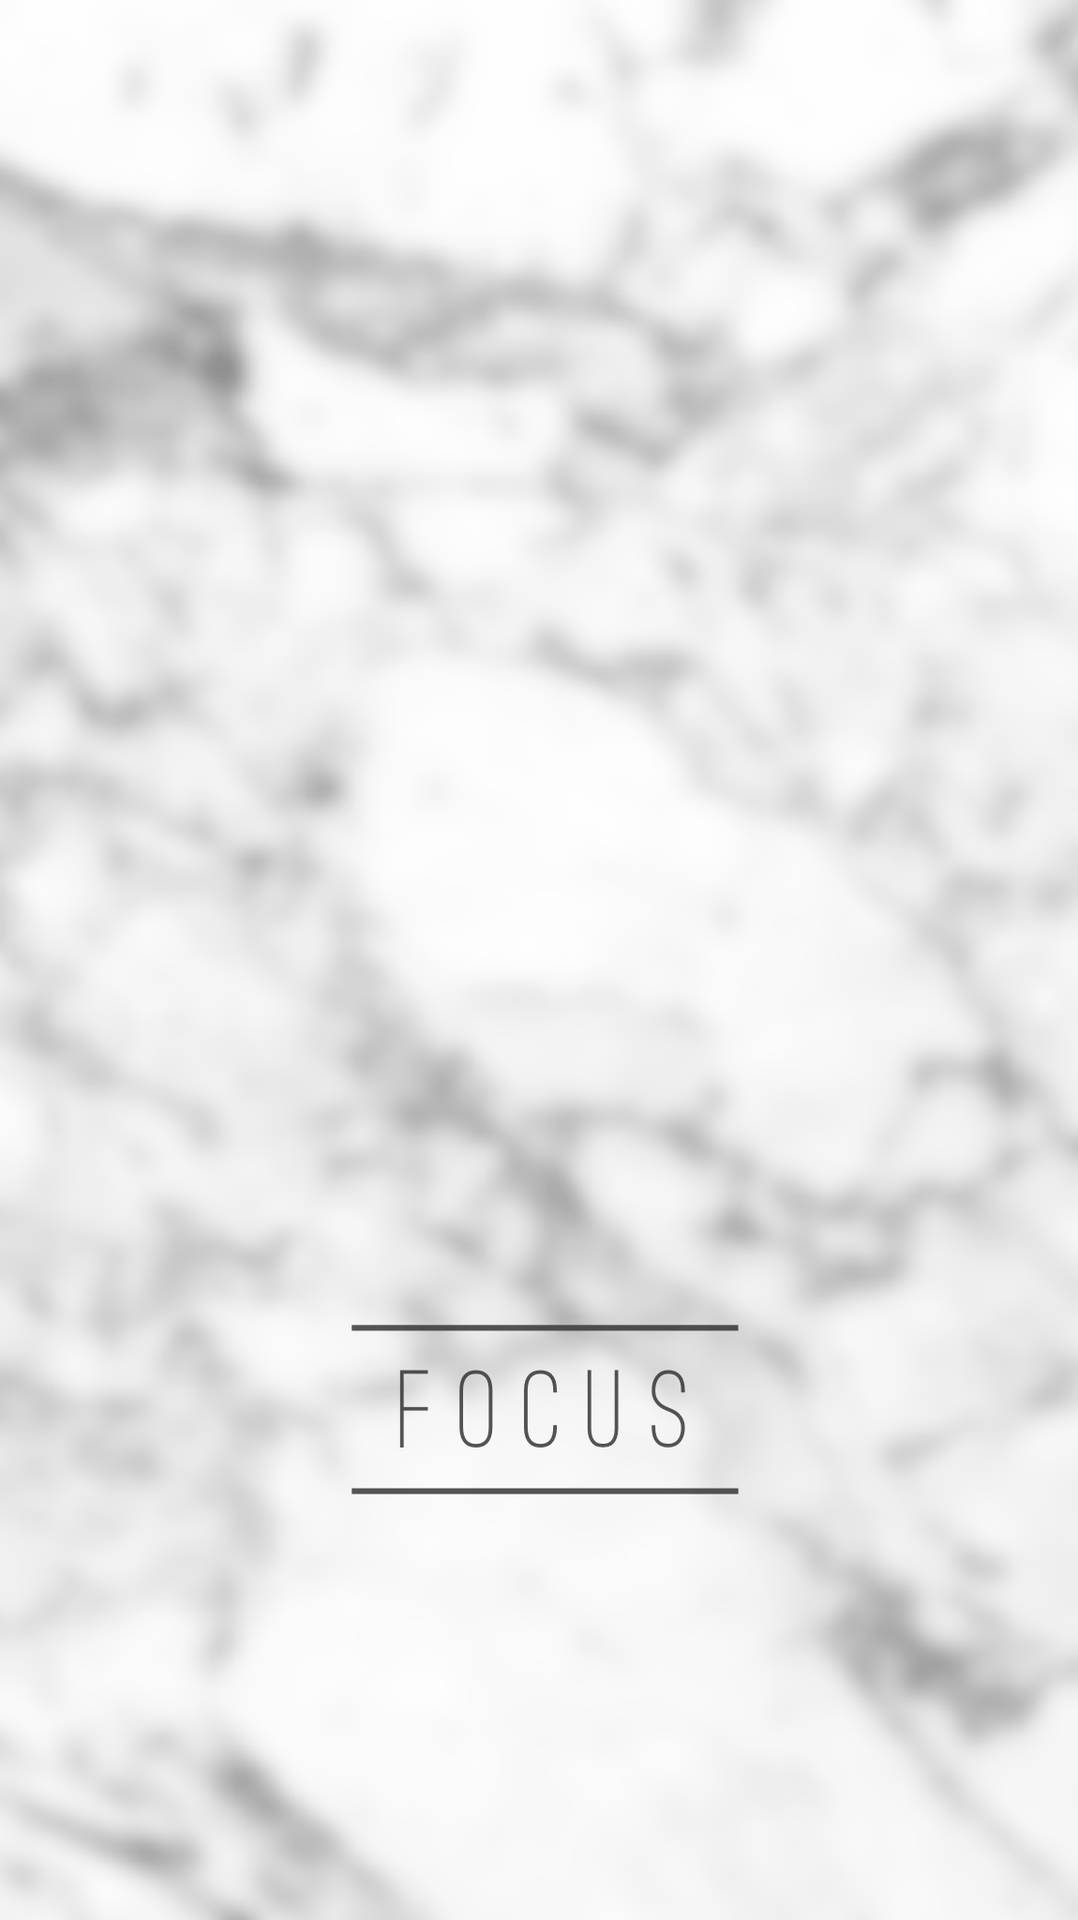 Focus On White Marble Background